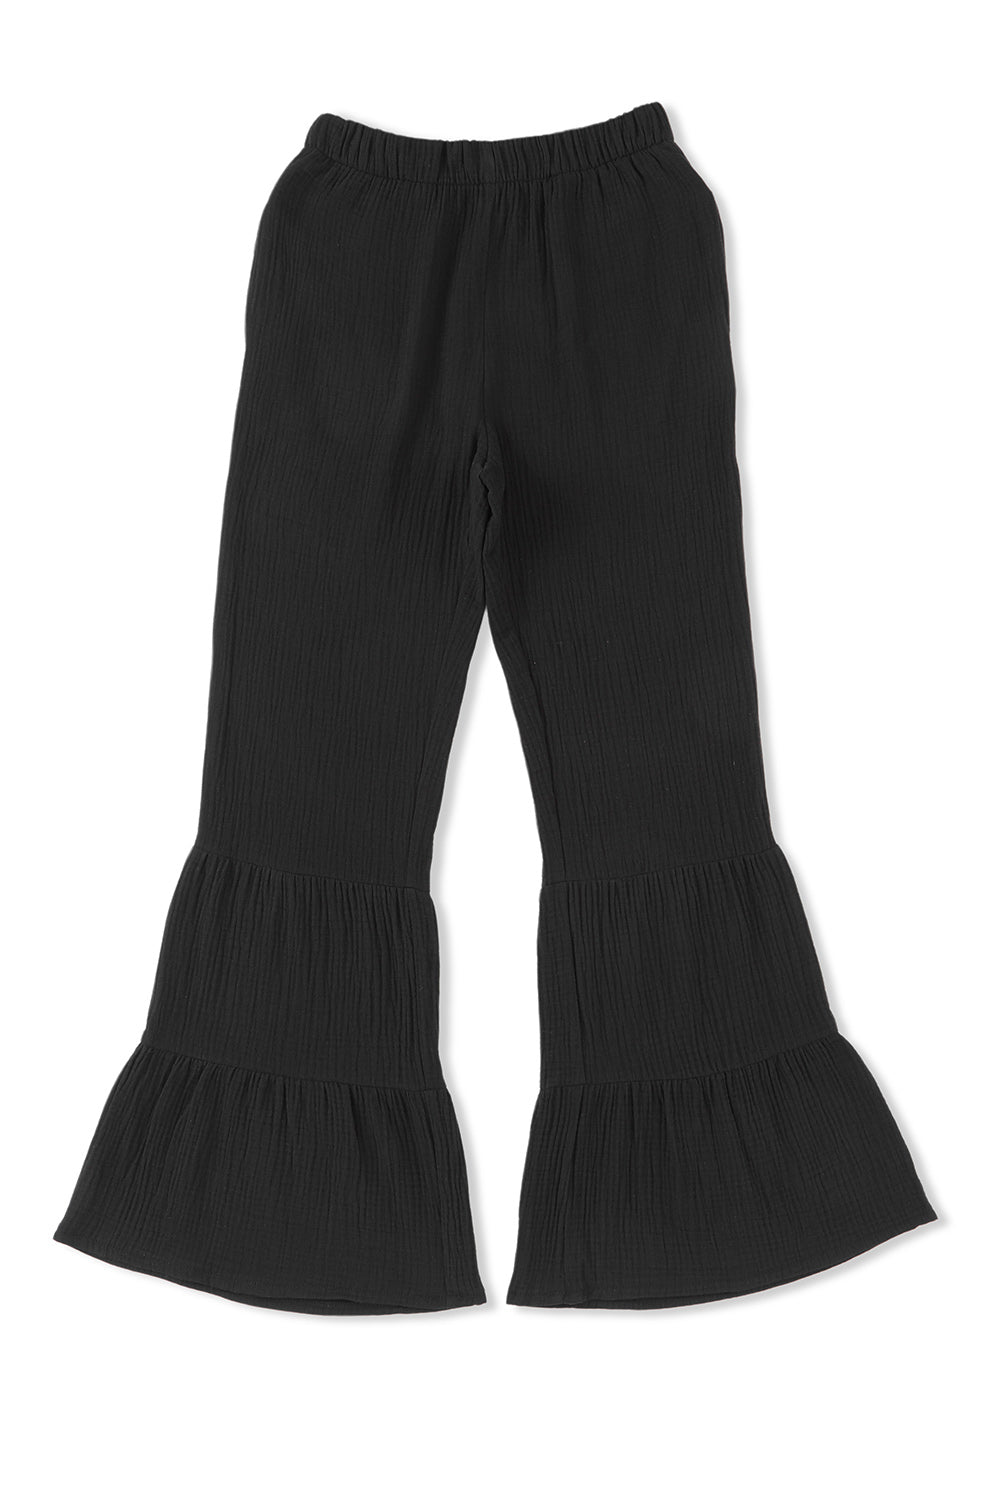 Long Flare Pants with Pocket - Black / S - Bottoms - Pants - 4 - 2024